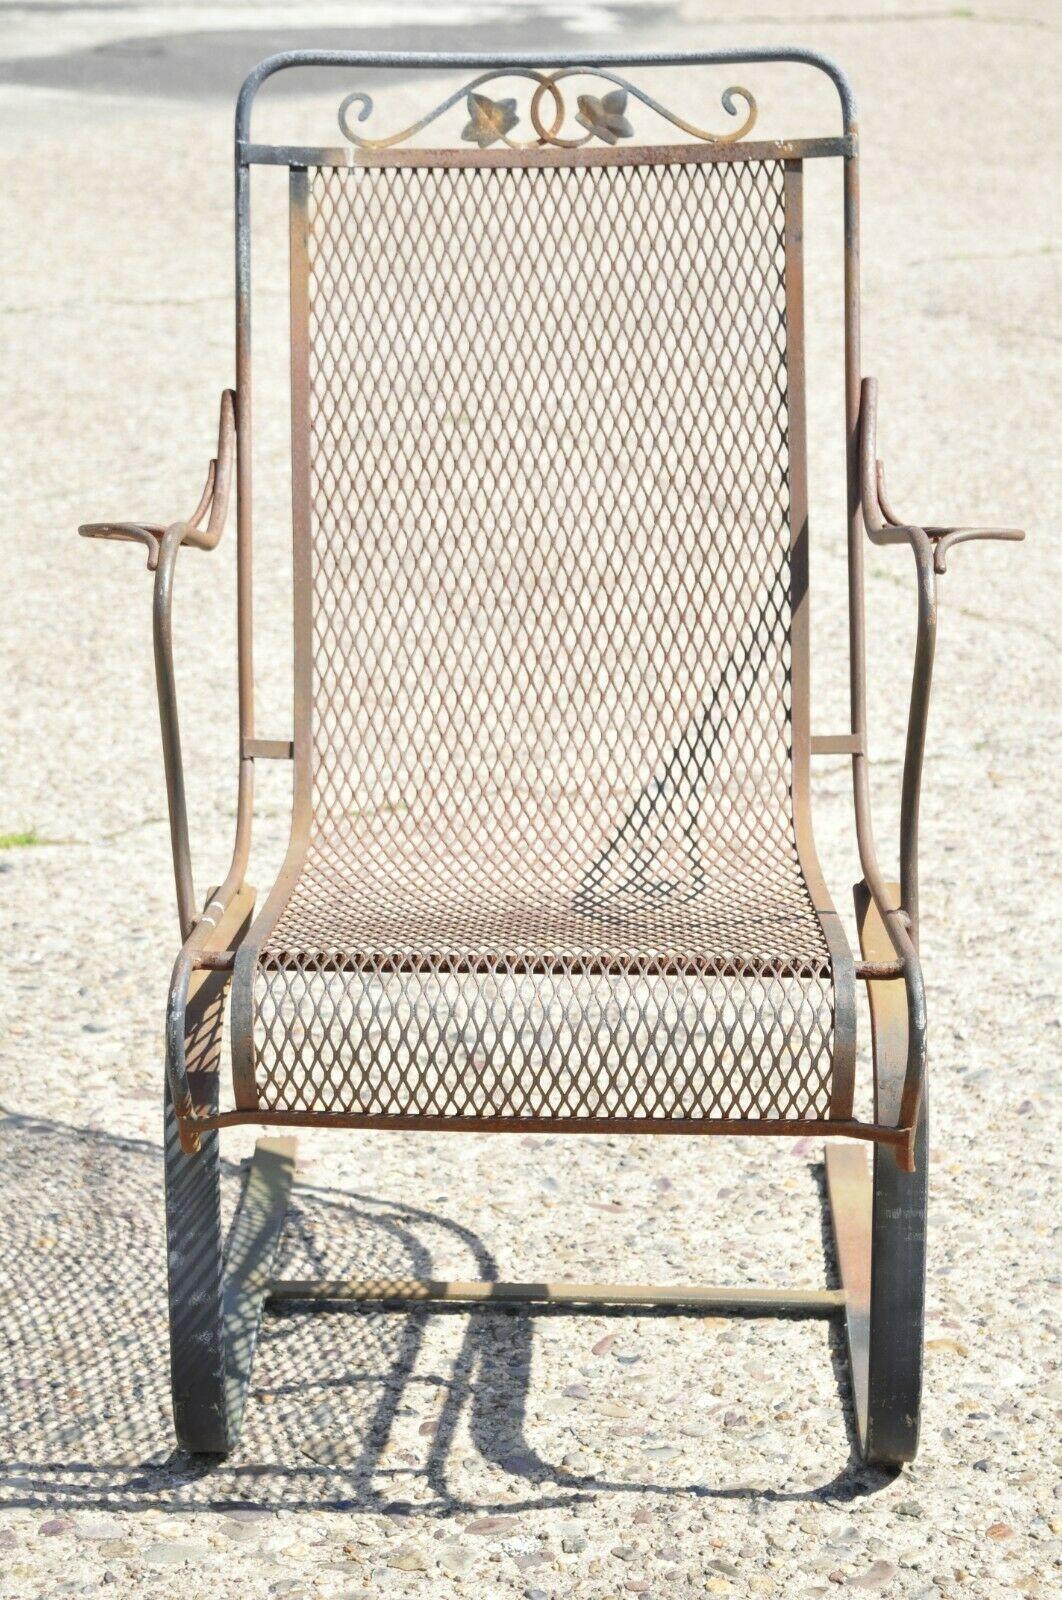 Vintage Woodard Wrought Iron Maple Leaf Garden Patio Bouncer Spring Chair. Item features iron and steel frame, mesh seat, maple leaf and vine design, very nice vintage item, quality American craftsmanship. Circa Mid 20th Century. Measurements: 38